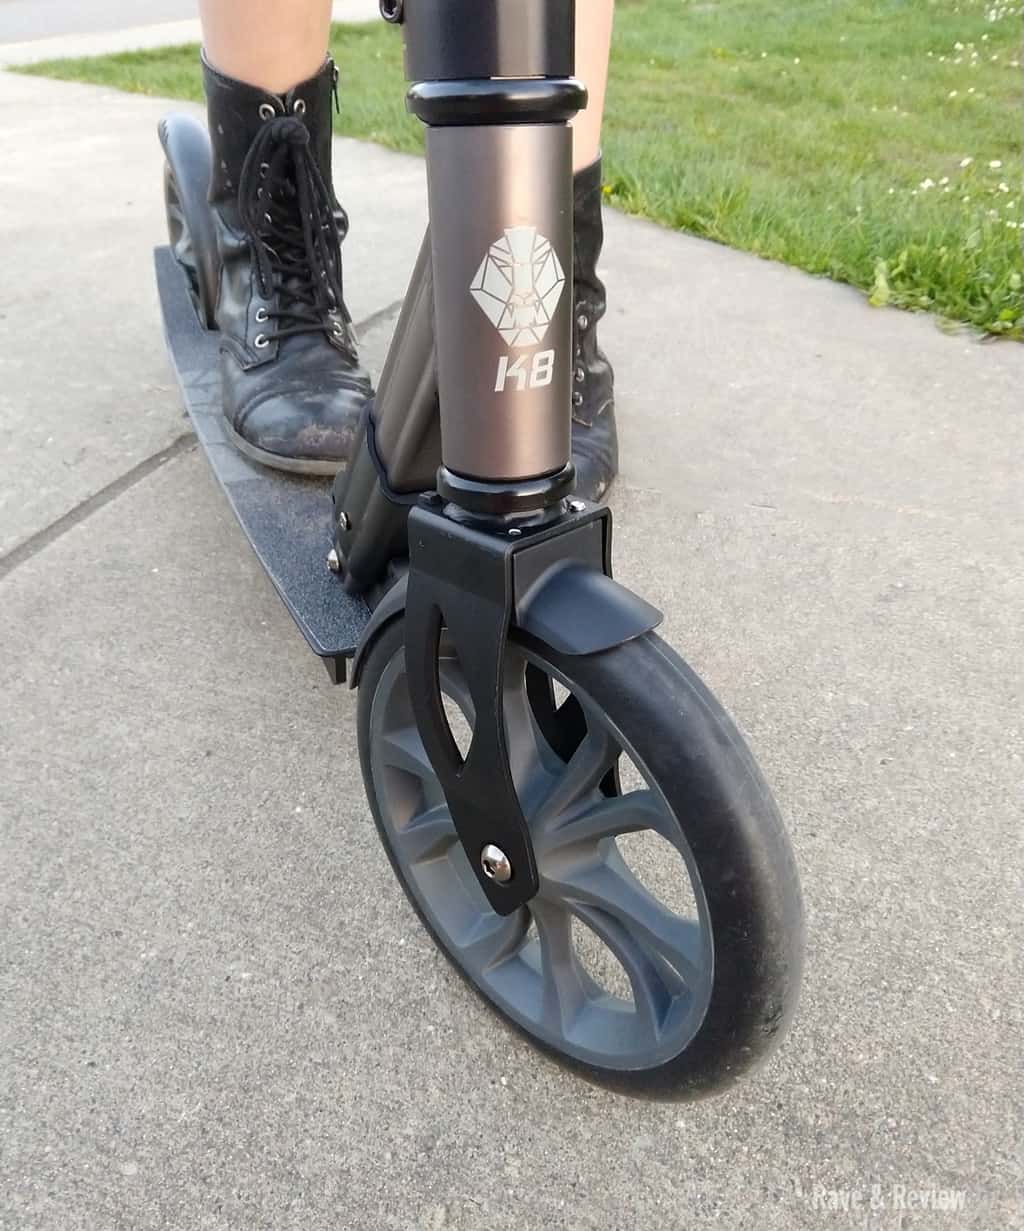 Swagtron K8 scooter